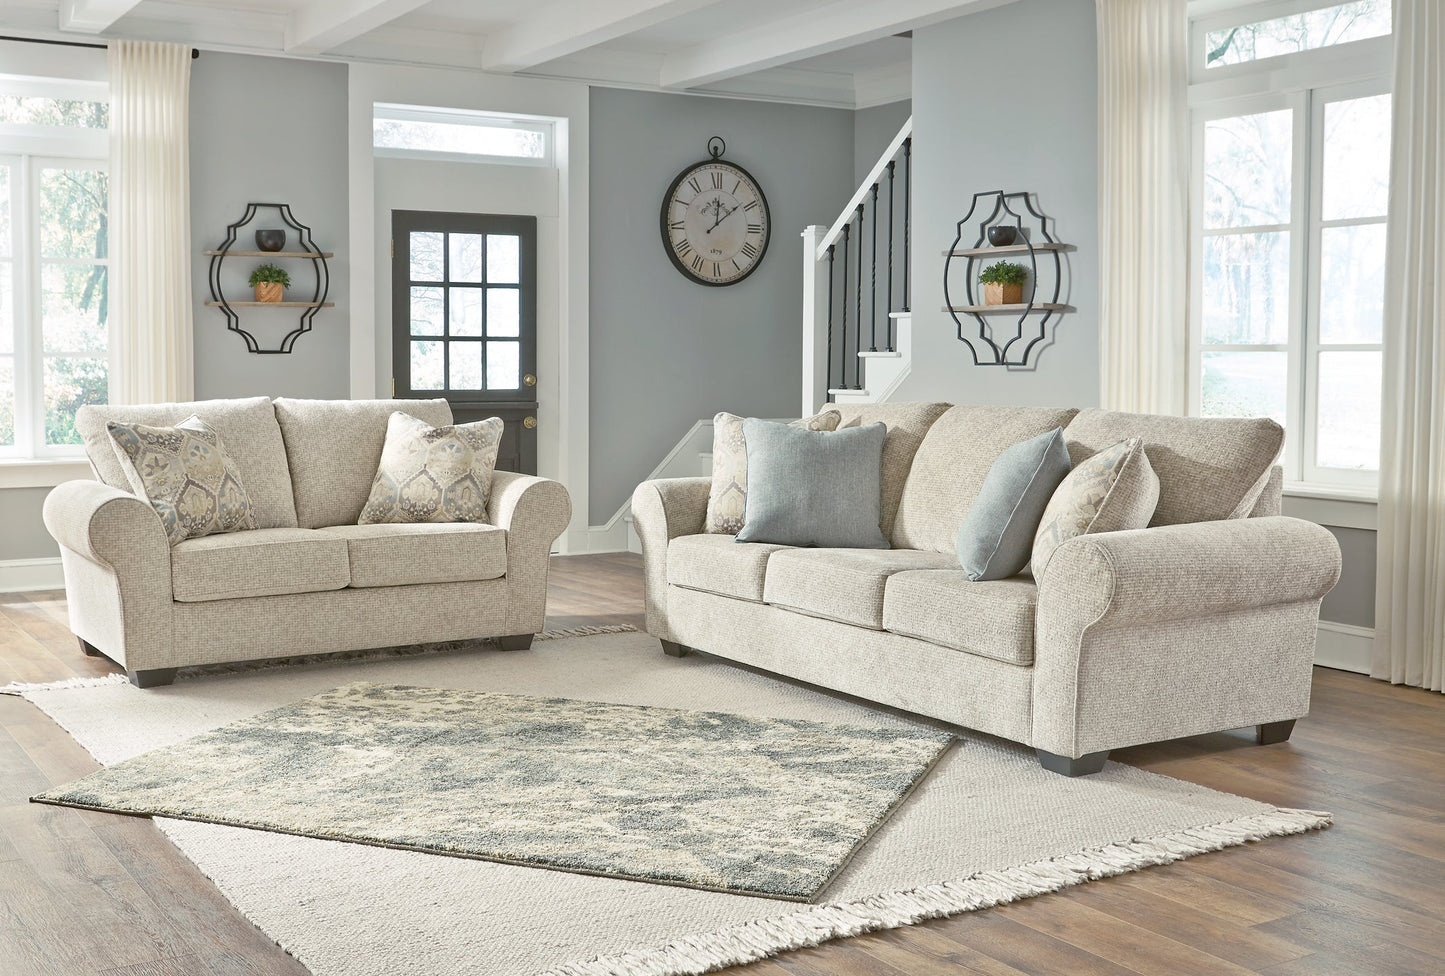 Haisley Sofa, Loveseat, Chair and Ottoman at Walker Mattress and Furniture Locations in Cedar Park and Belton TX.